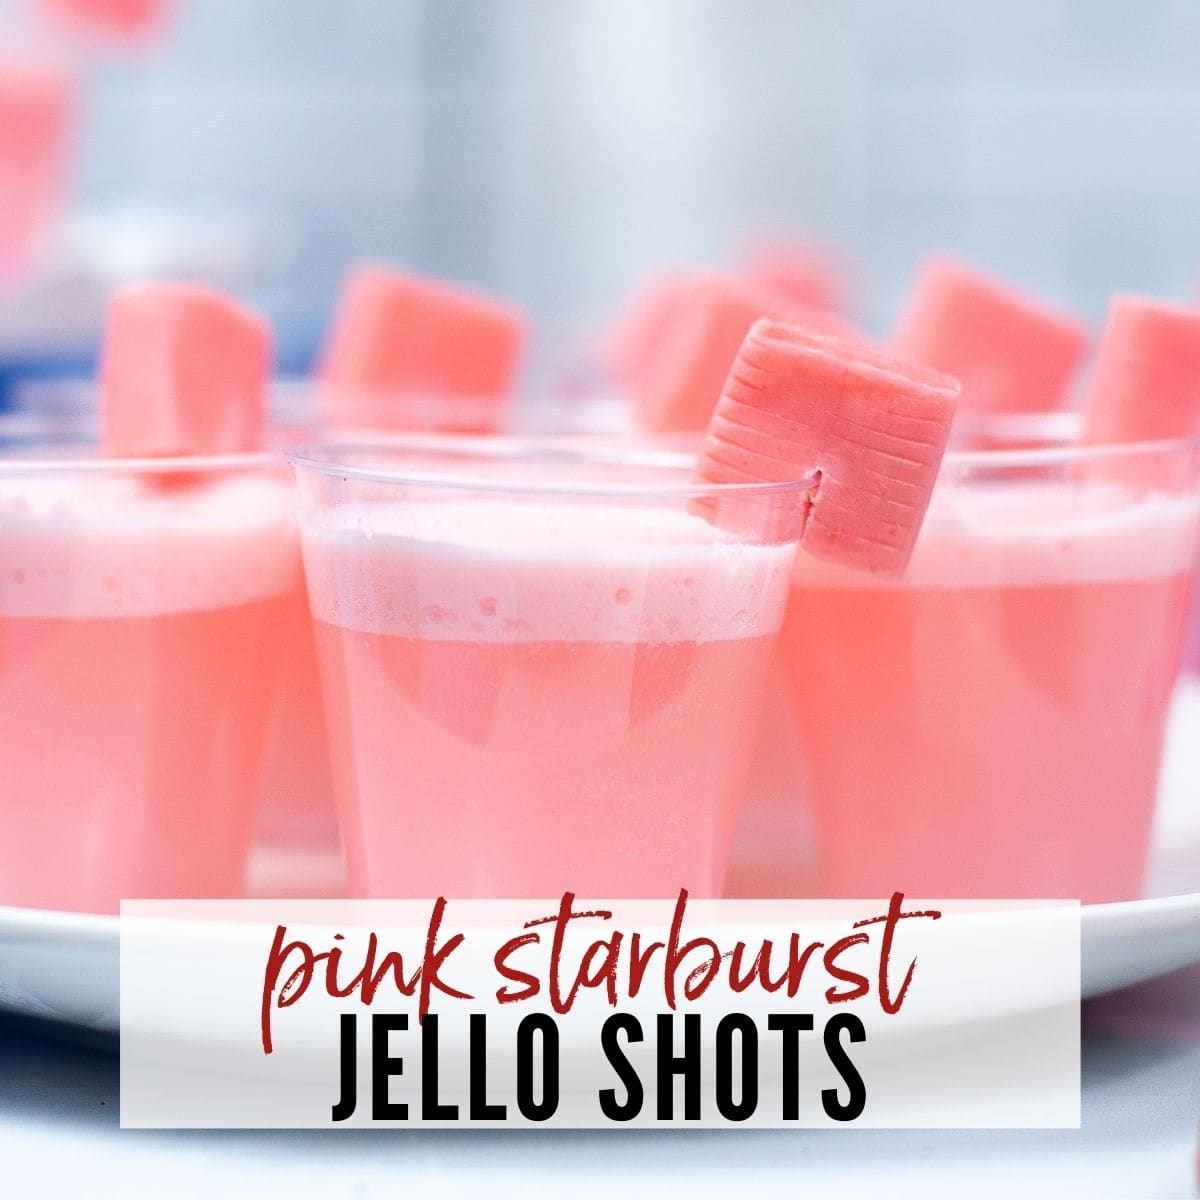 pink jello shots with starburst candy on the side for garnish with text overlay